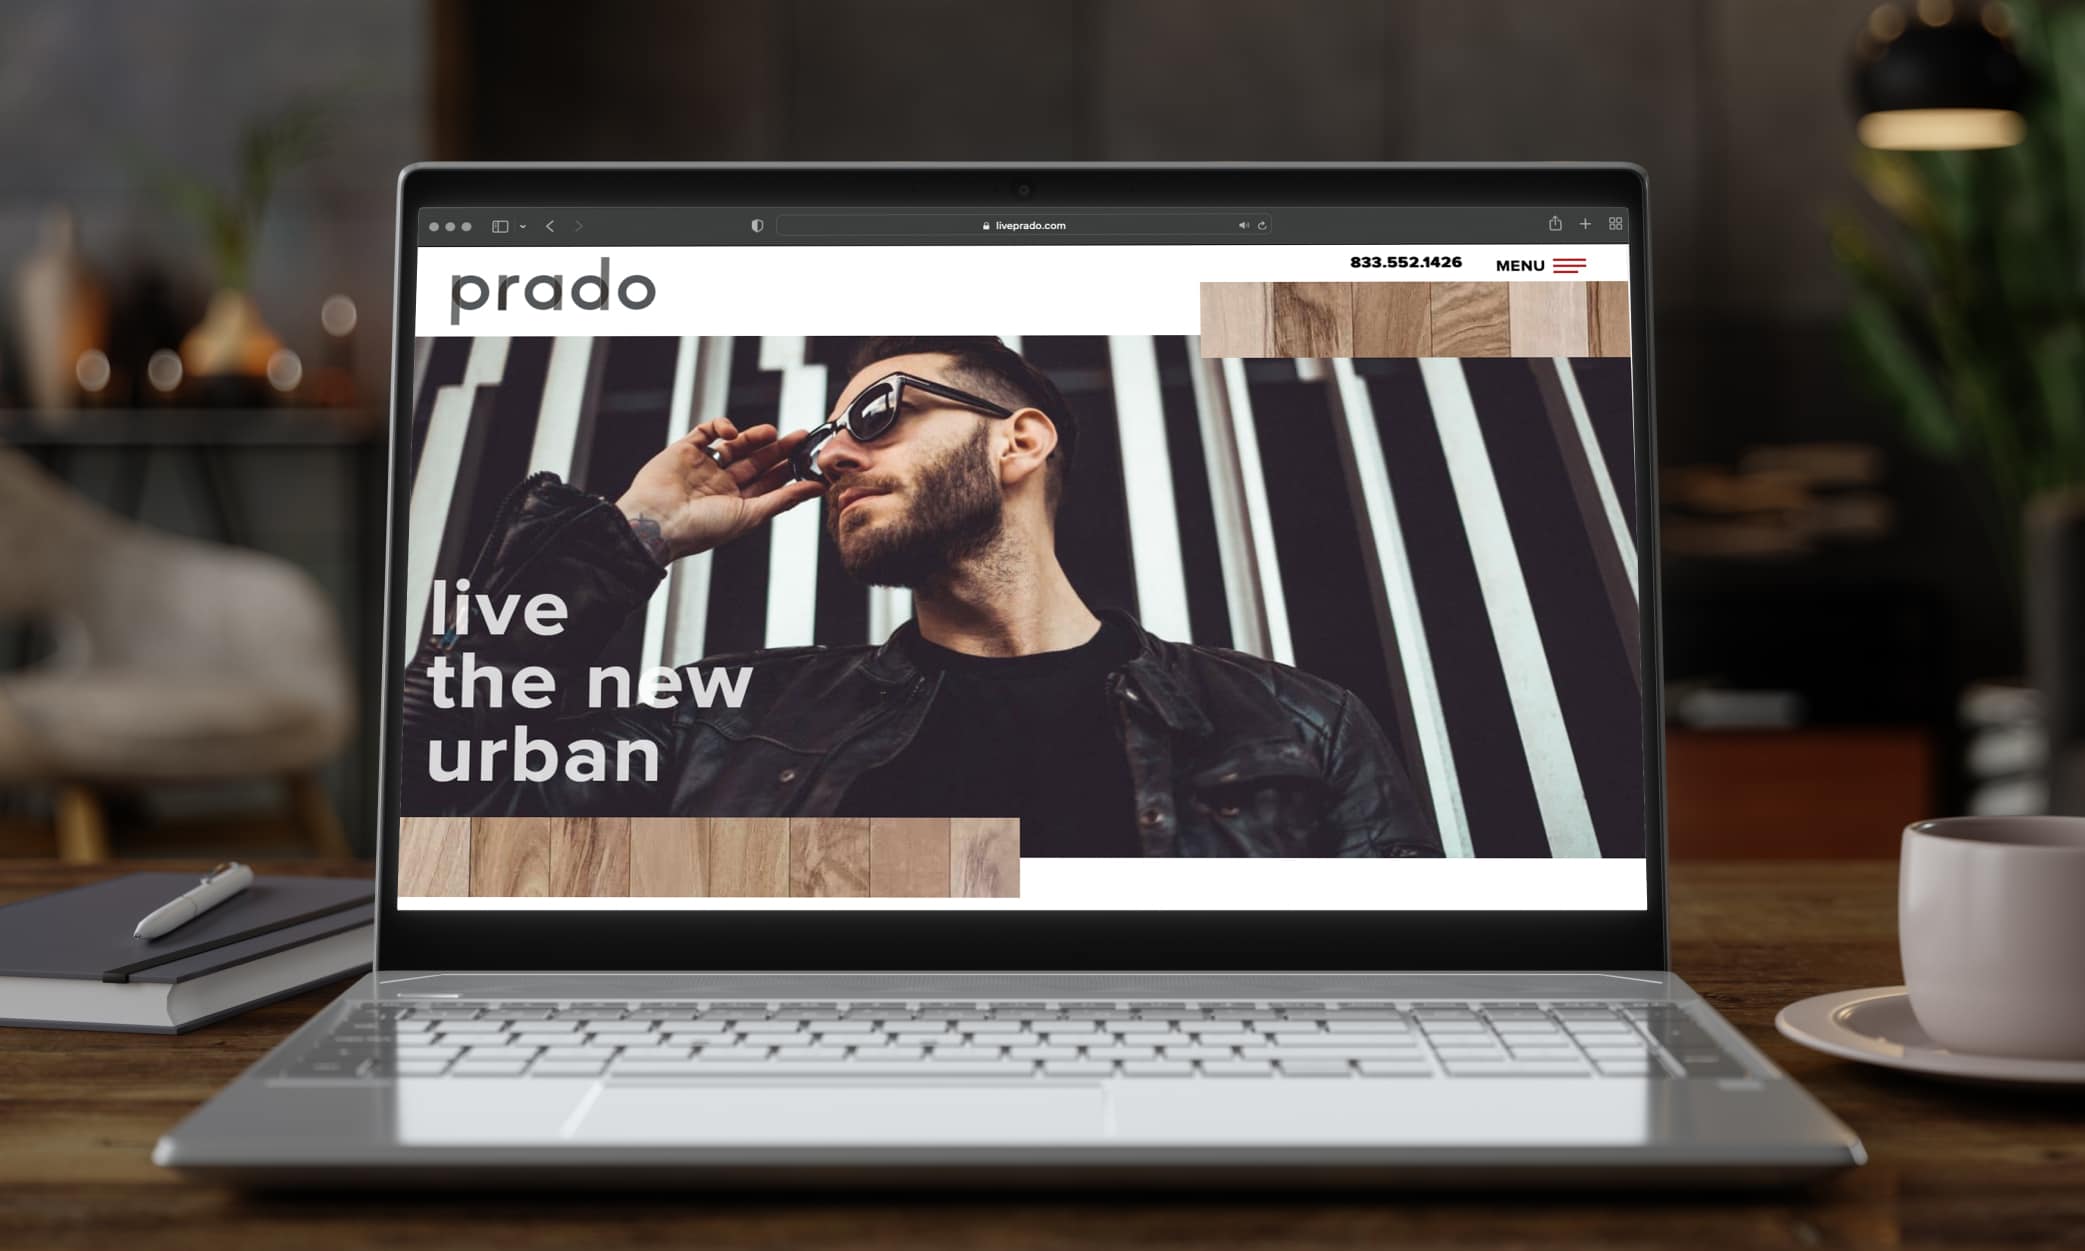 Prado website home page on laptop screen. High contrast image of man in sunglass and striking black and white background.